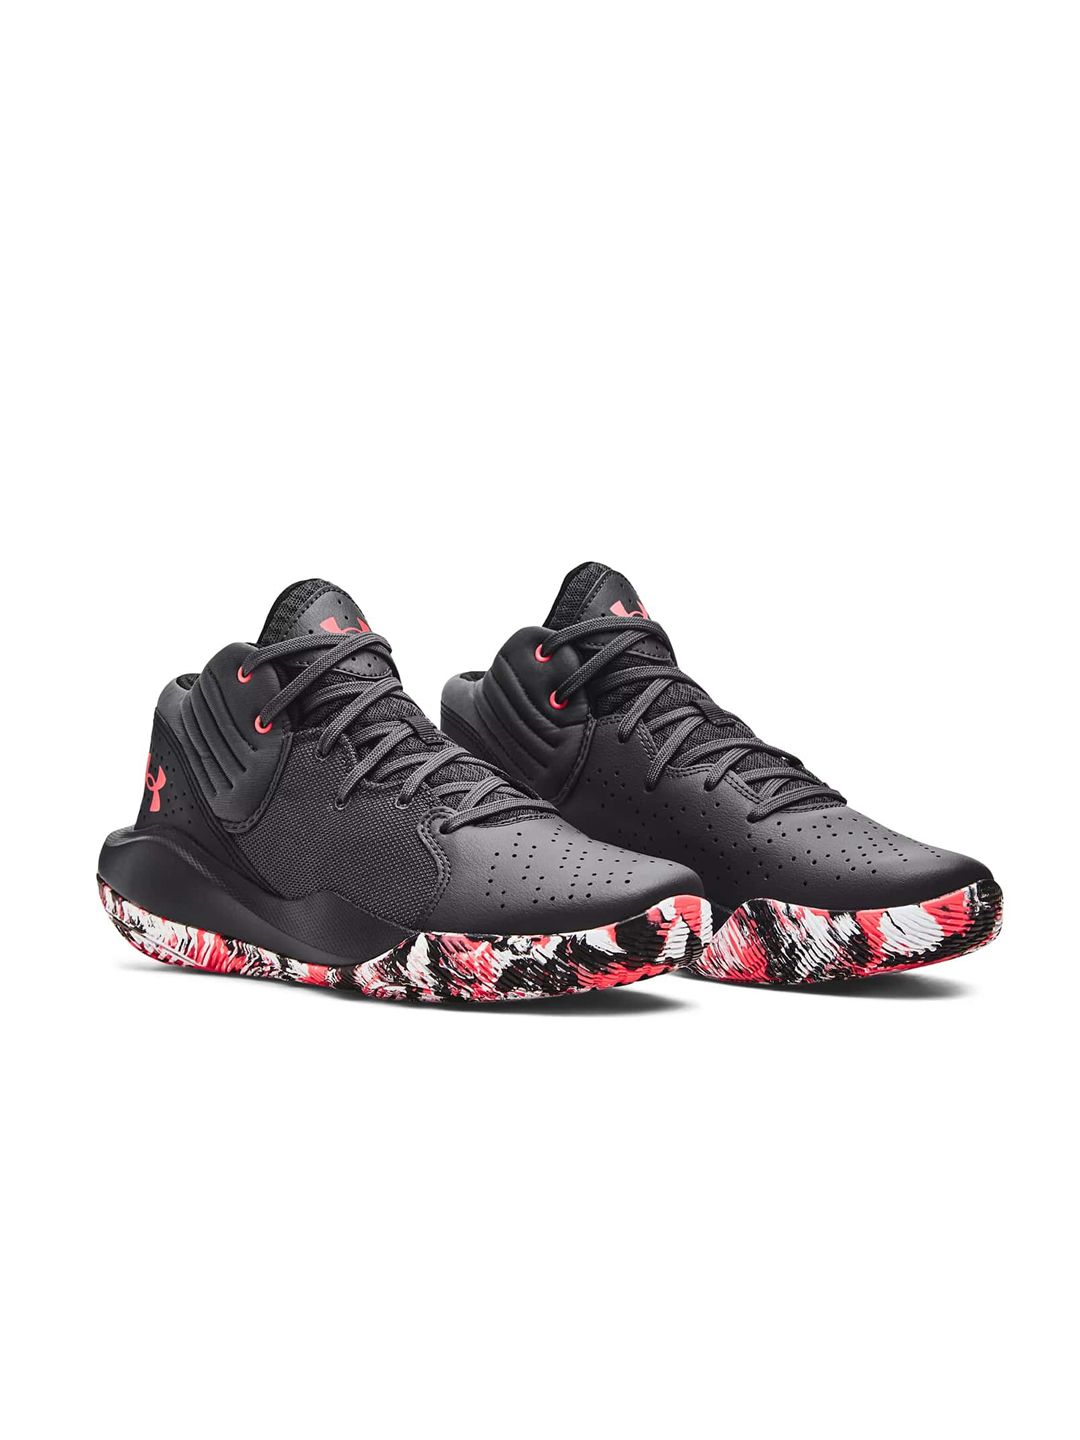 UNDER ARMOUR Unisex Perforated Detail Woven Design Jet '21 Basketball Shoes Price in India